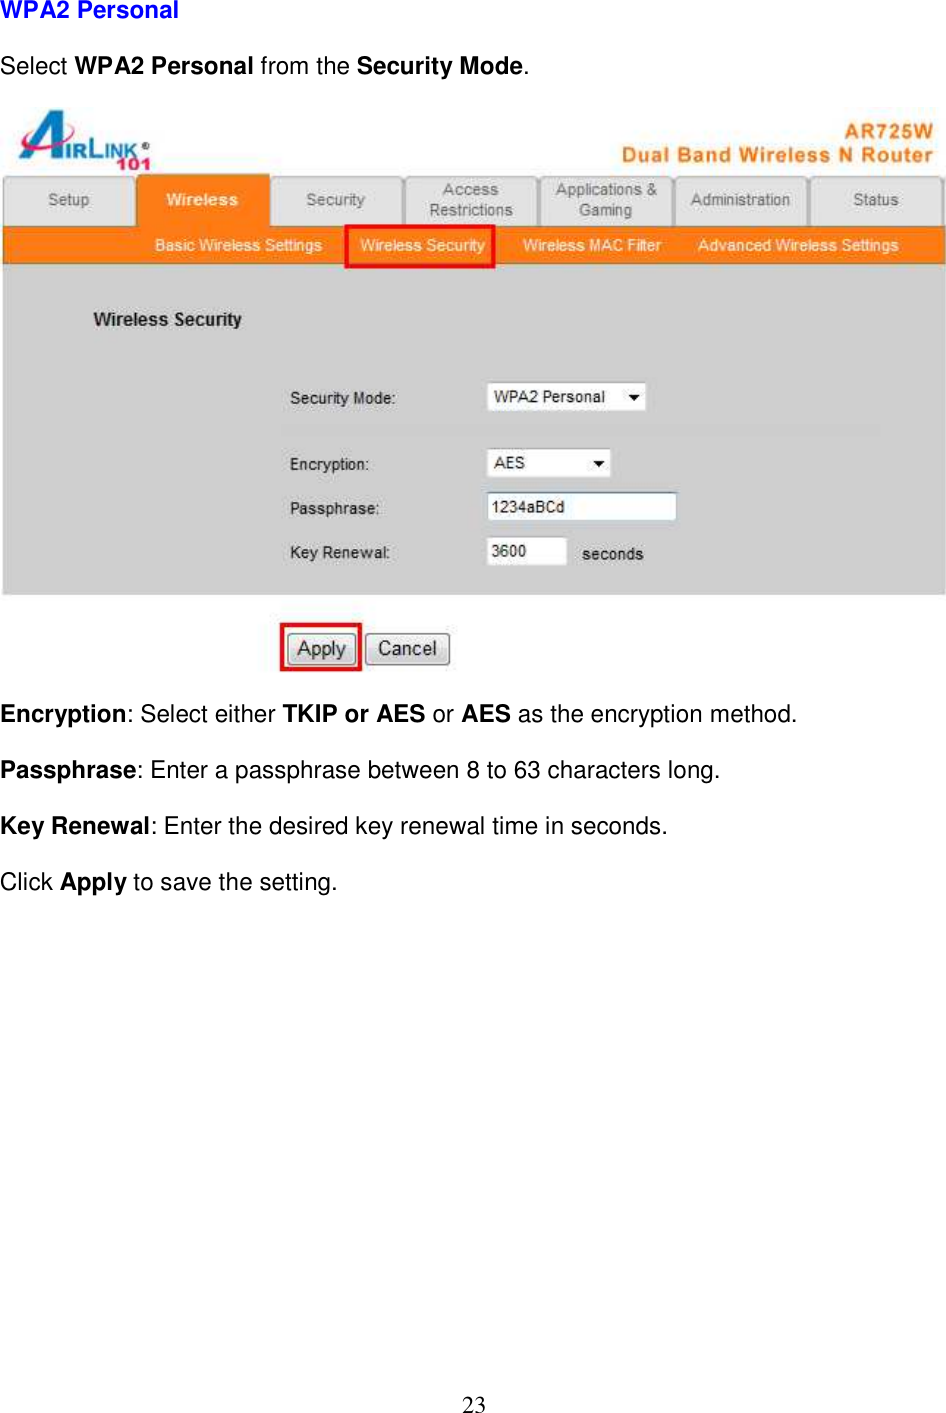 23 WPA2 Personal  Select WPA2 Personal from the Security Mode.    Encryption: Select either TKIP or AES or AES as the encryption method.  Passphrase: Enter a passphrase between 8 to 63 characters long.  Key Renewal: Enter the desired key renewal time in seconds.  Click Apply to save the setting.                  